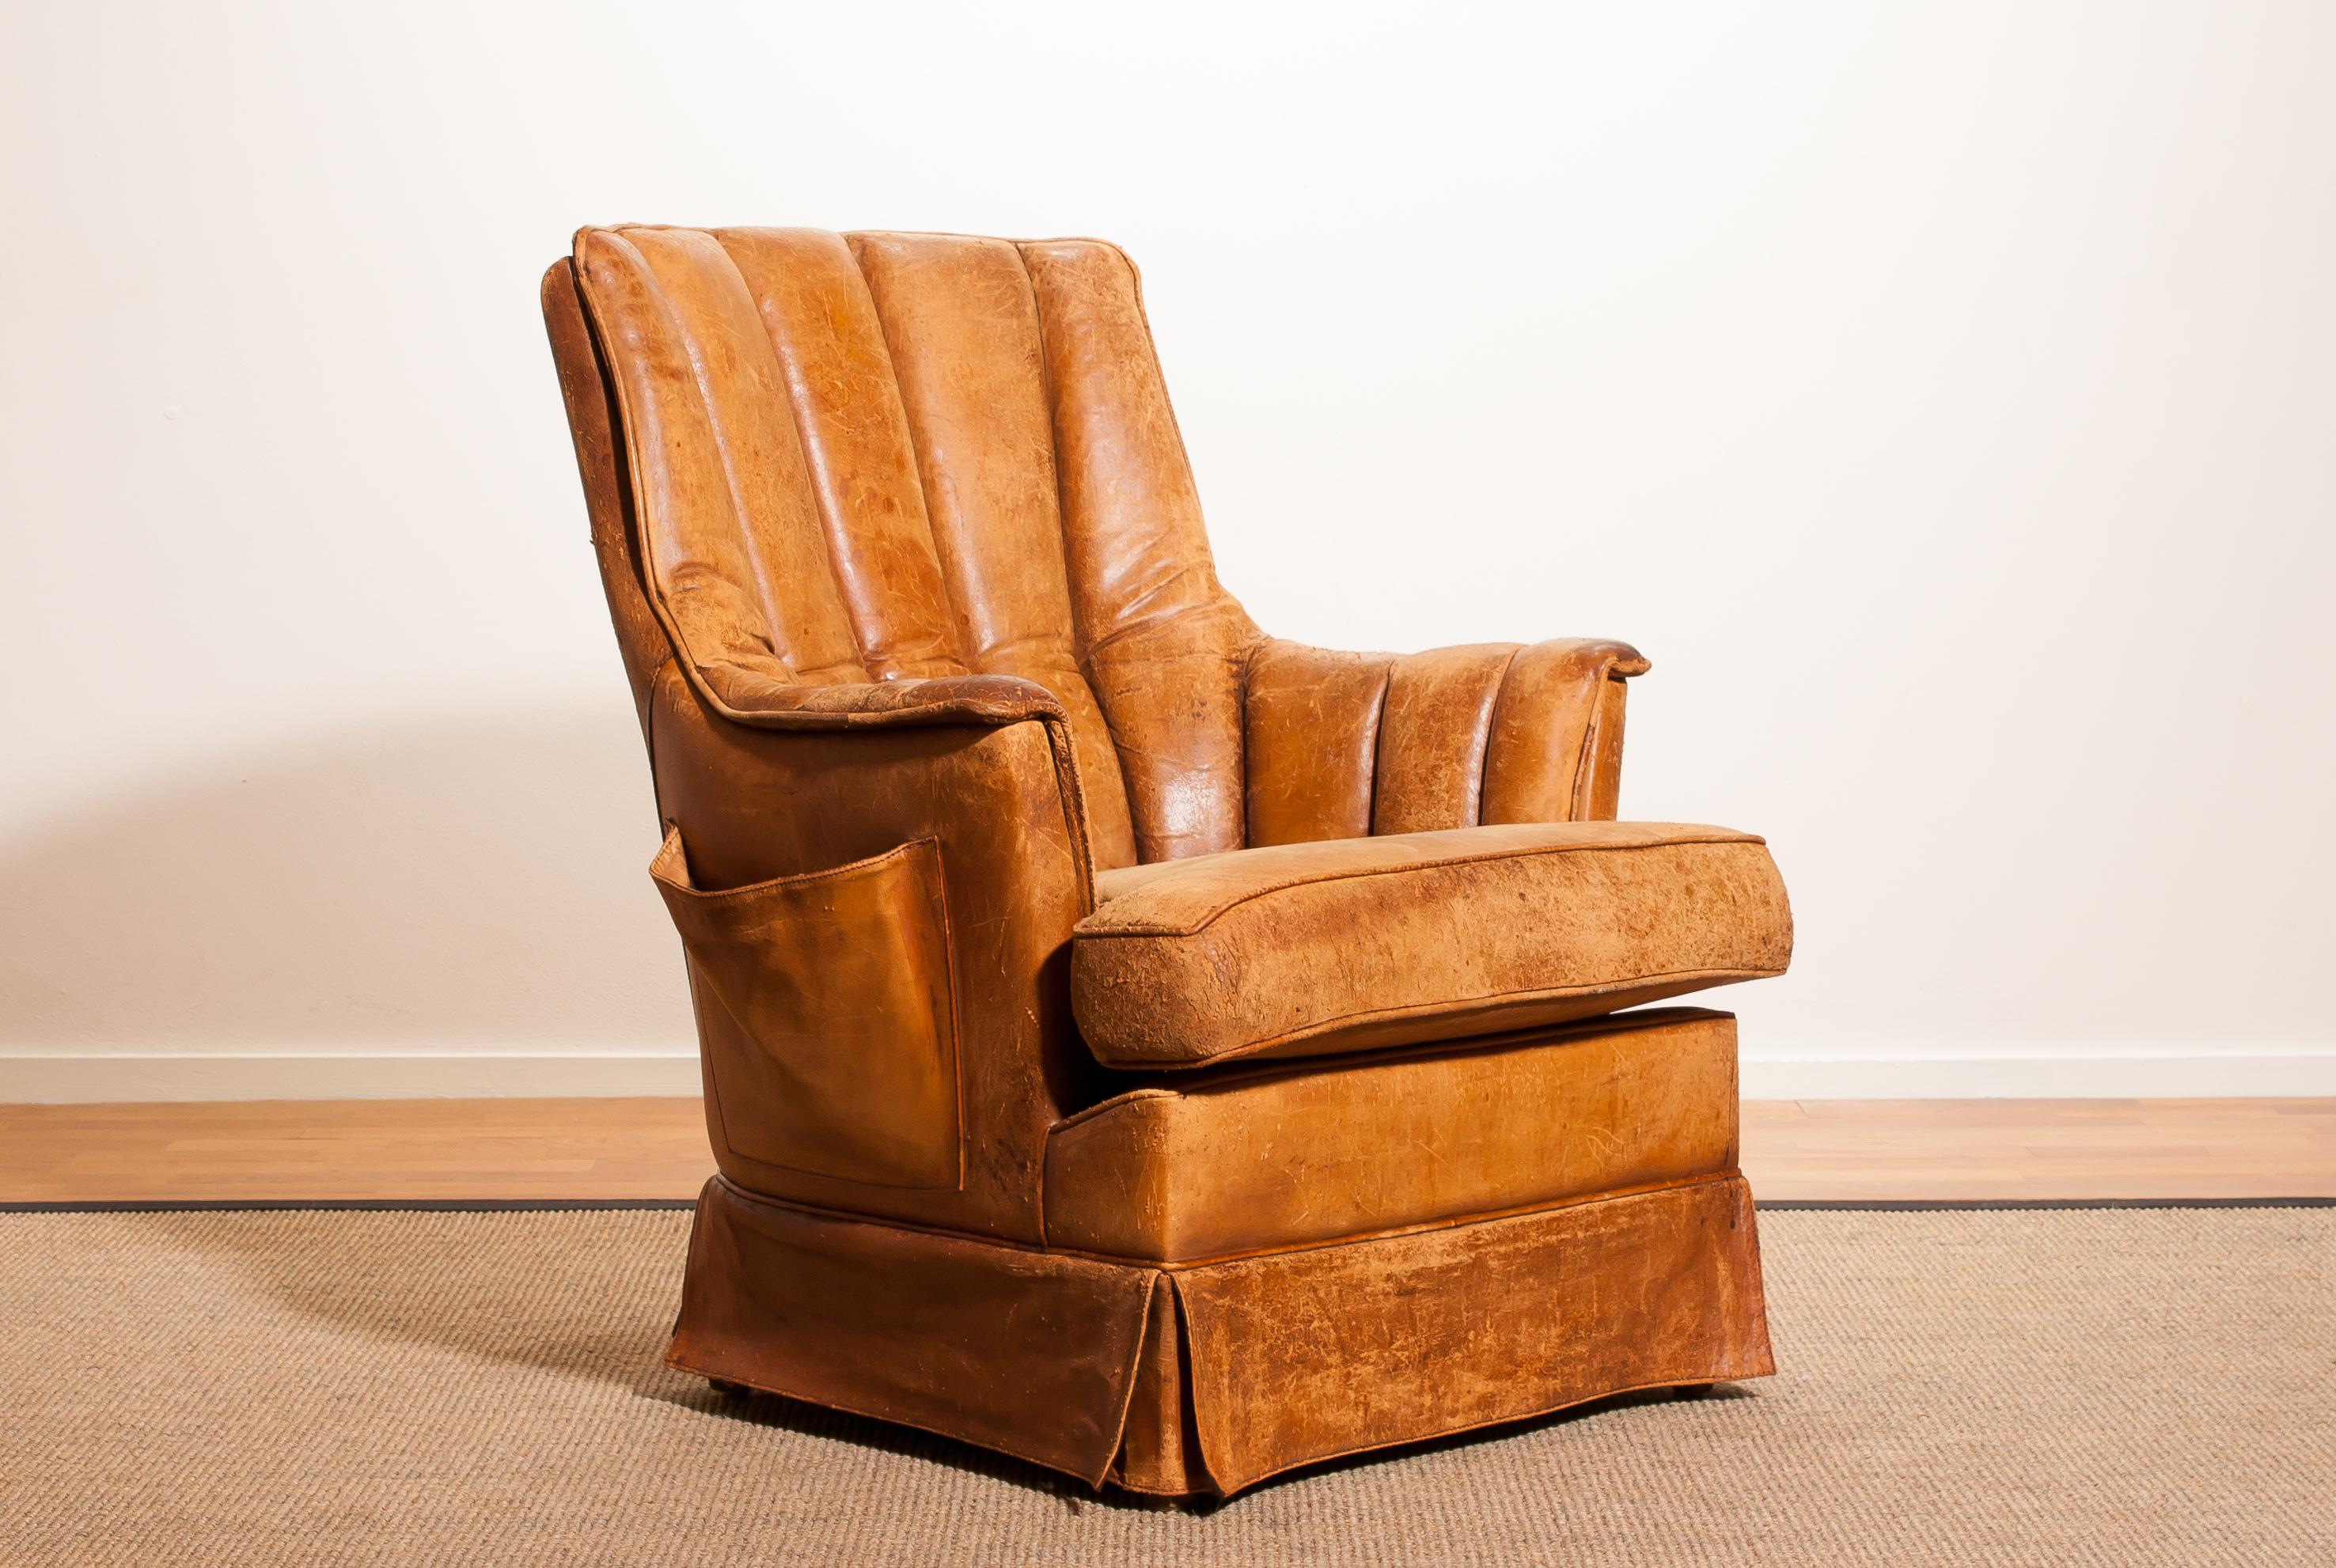 Fantastic club - armchair from France.
This chair is made of sheep leather with skirt and a magazine bag on its side.
It has a greatly used patina.
Period 1940s.
Dimensions: H 85 cm, W 75 cm, D 68 cm, Sh 46 cm.